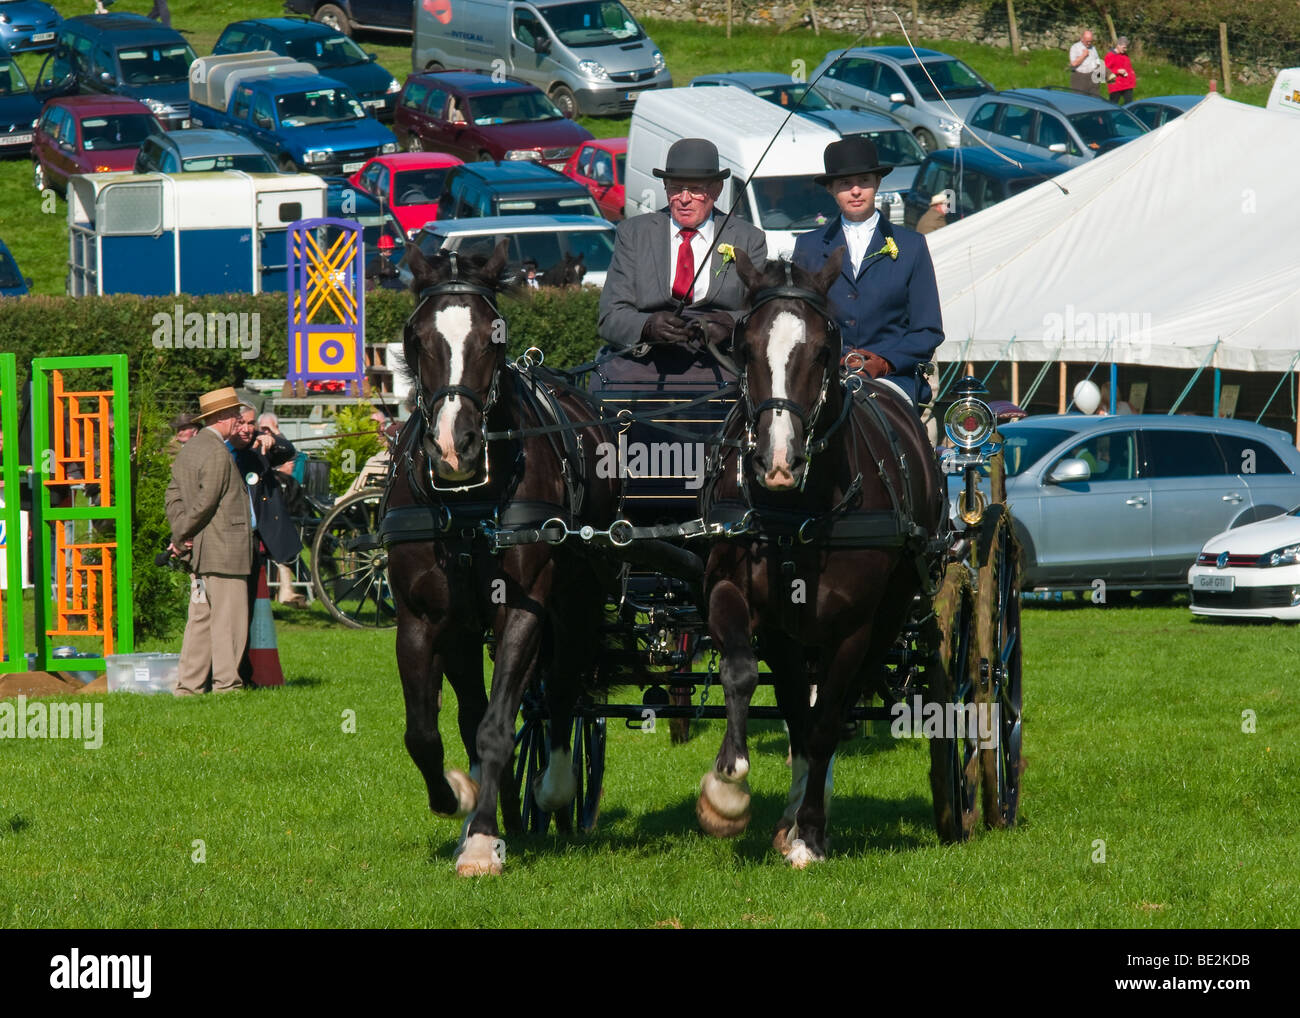 Cheval et chariot à Westmorland County Agricultural Show. Banque D'Images